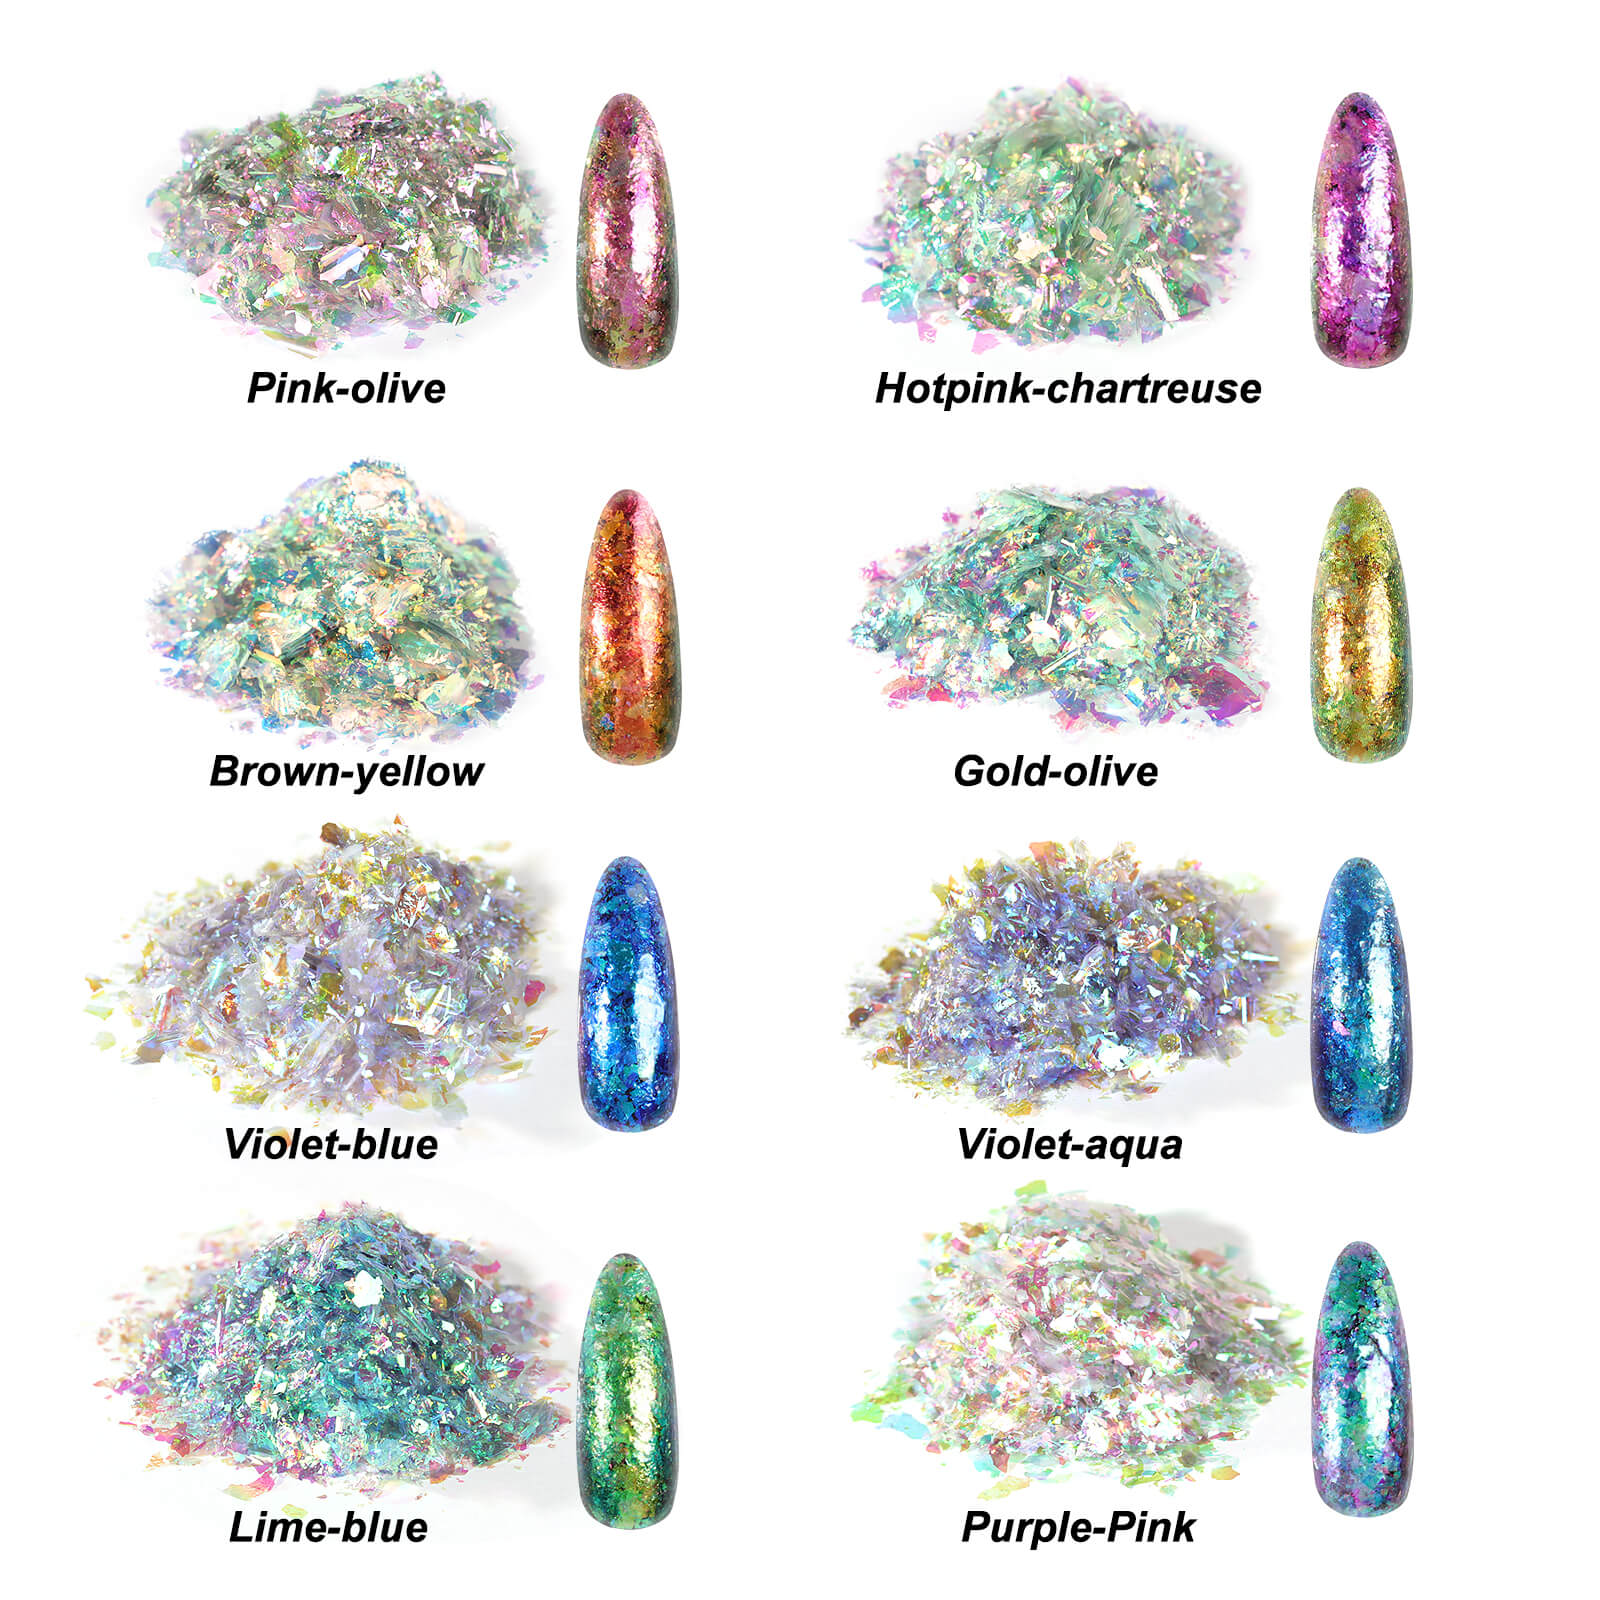 Chameleon Flakes & Opals (Read Descriptions) – Island Micas And More